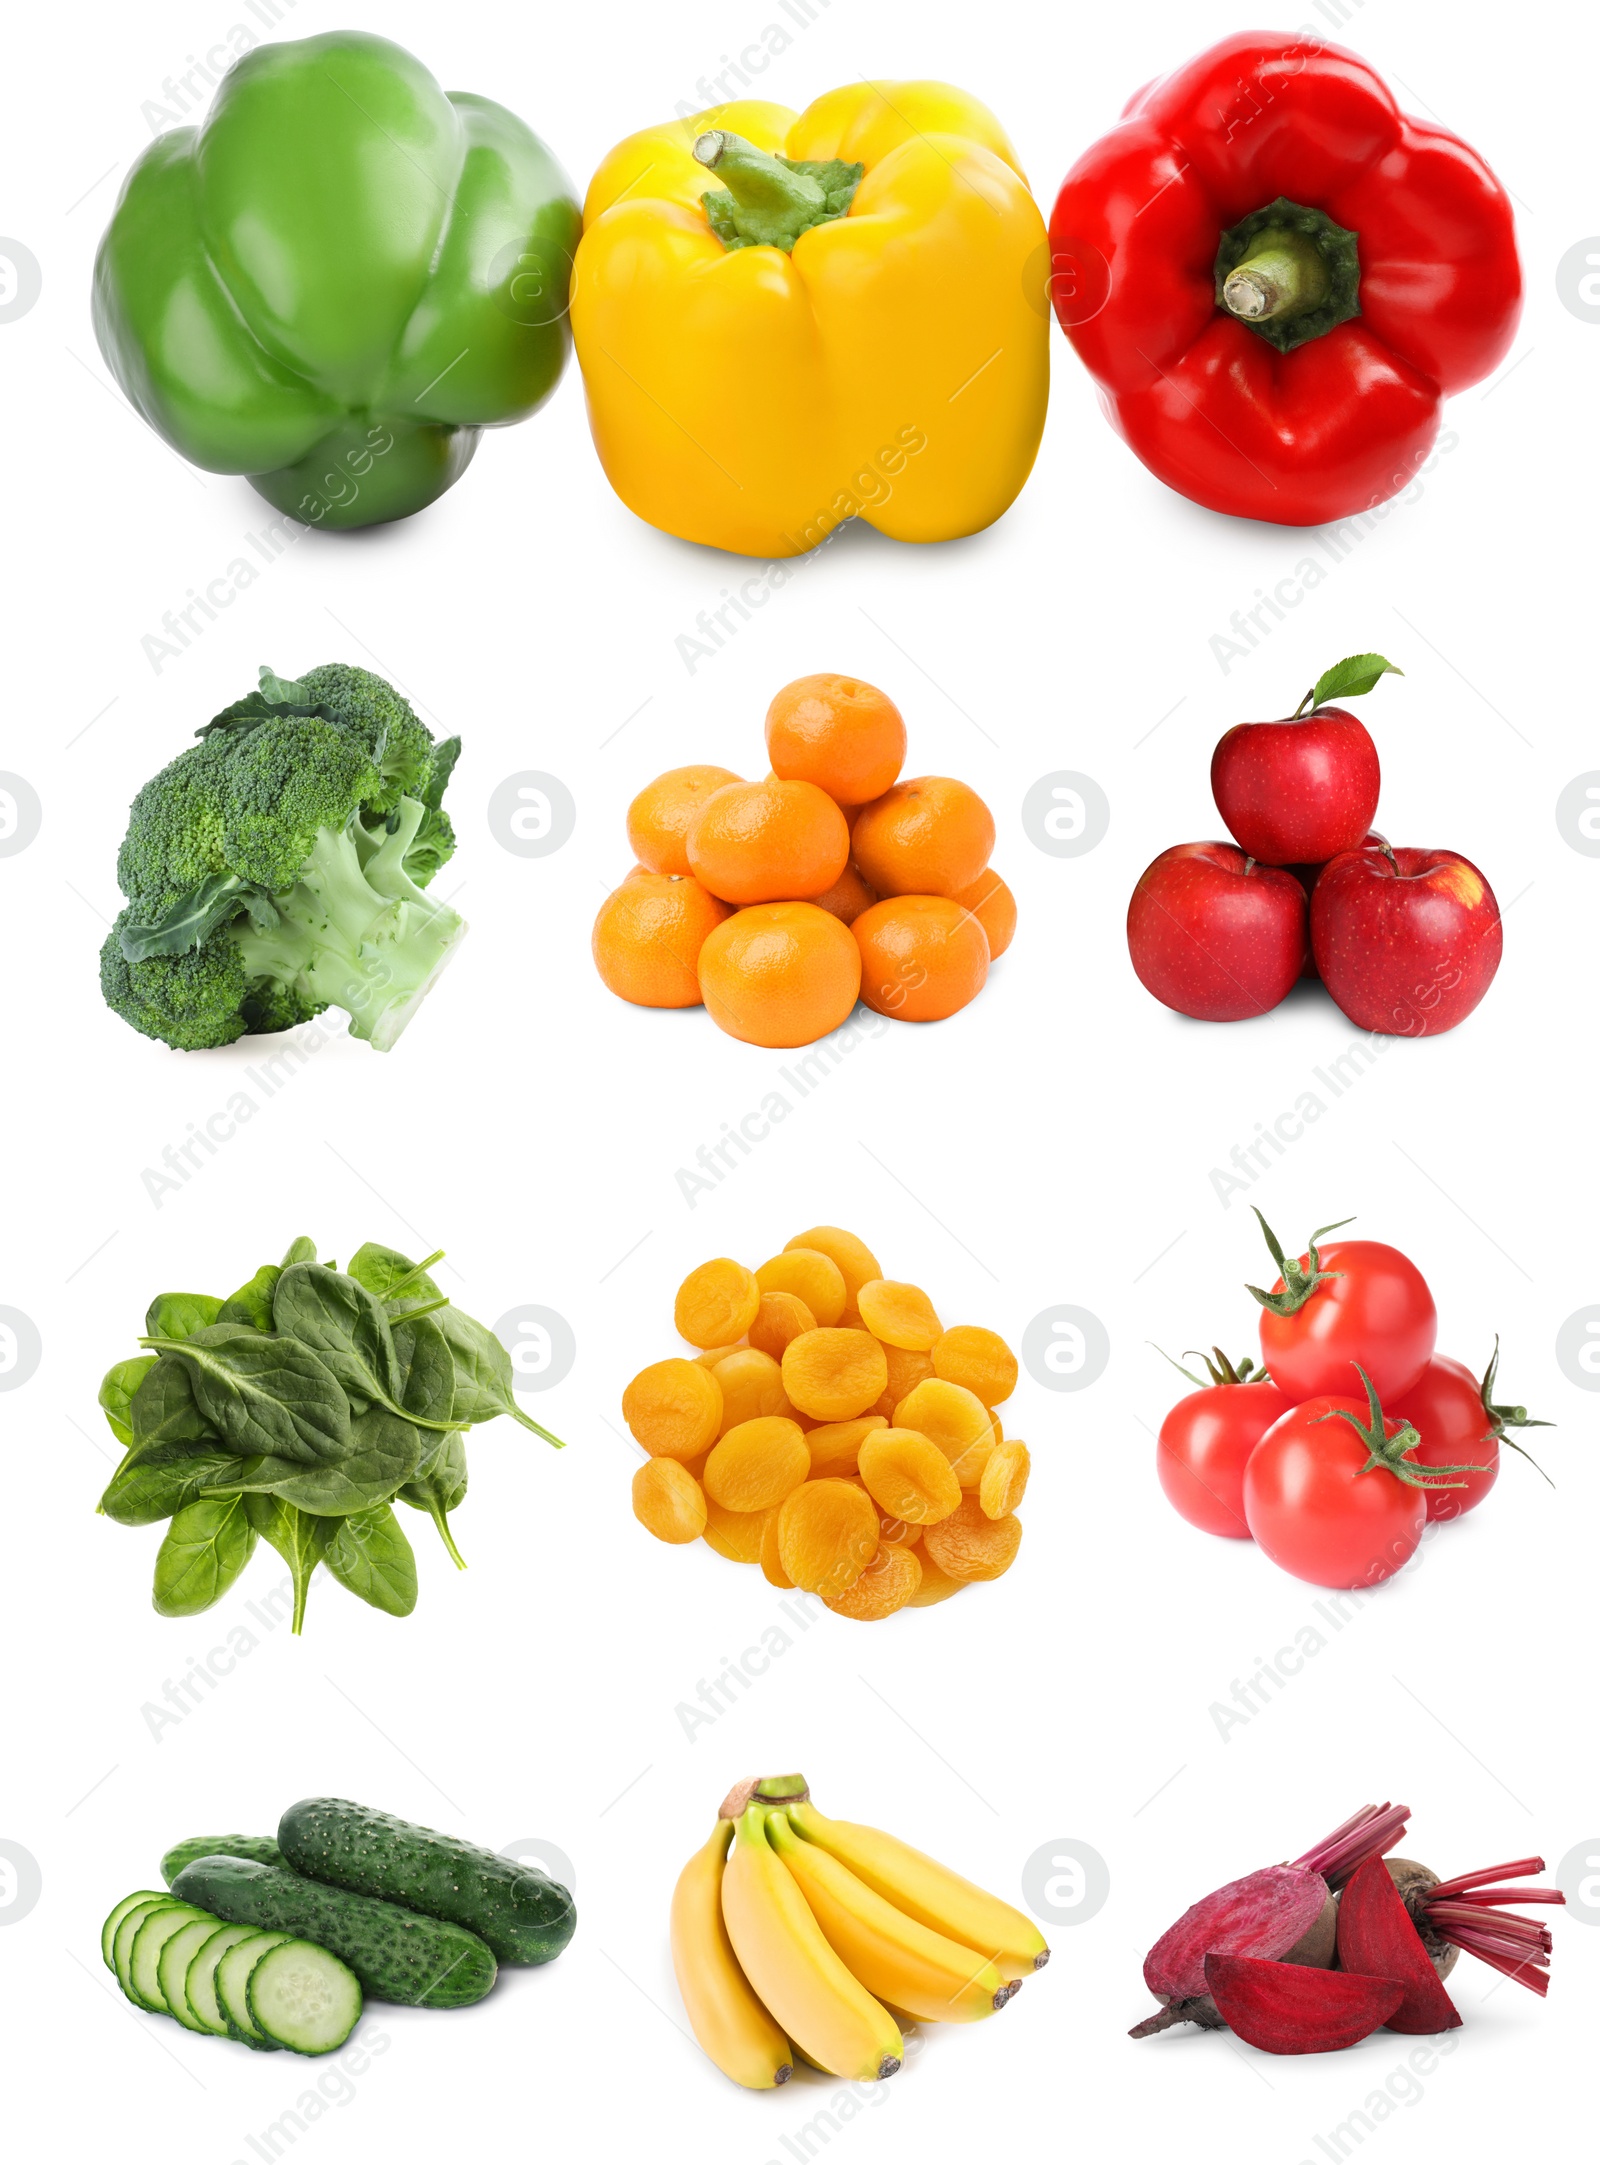 Image of Foods for healthy digestion, collage. Broccoli, bell peppers, cucumbers, spinach, tangerines, dried apricots, bananas, apples, tomatoes and beets on white background